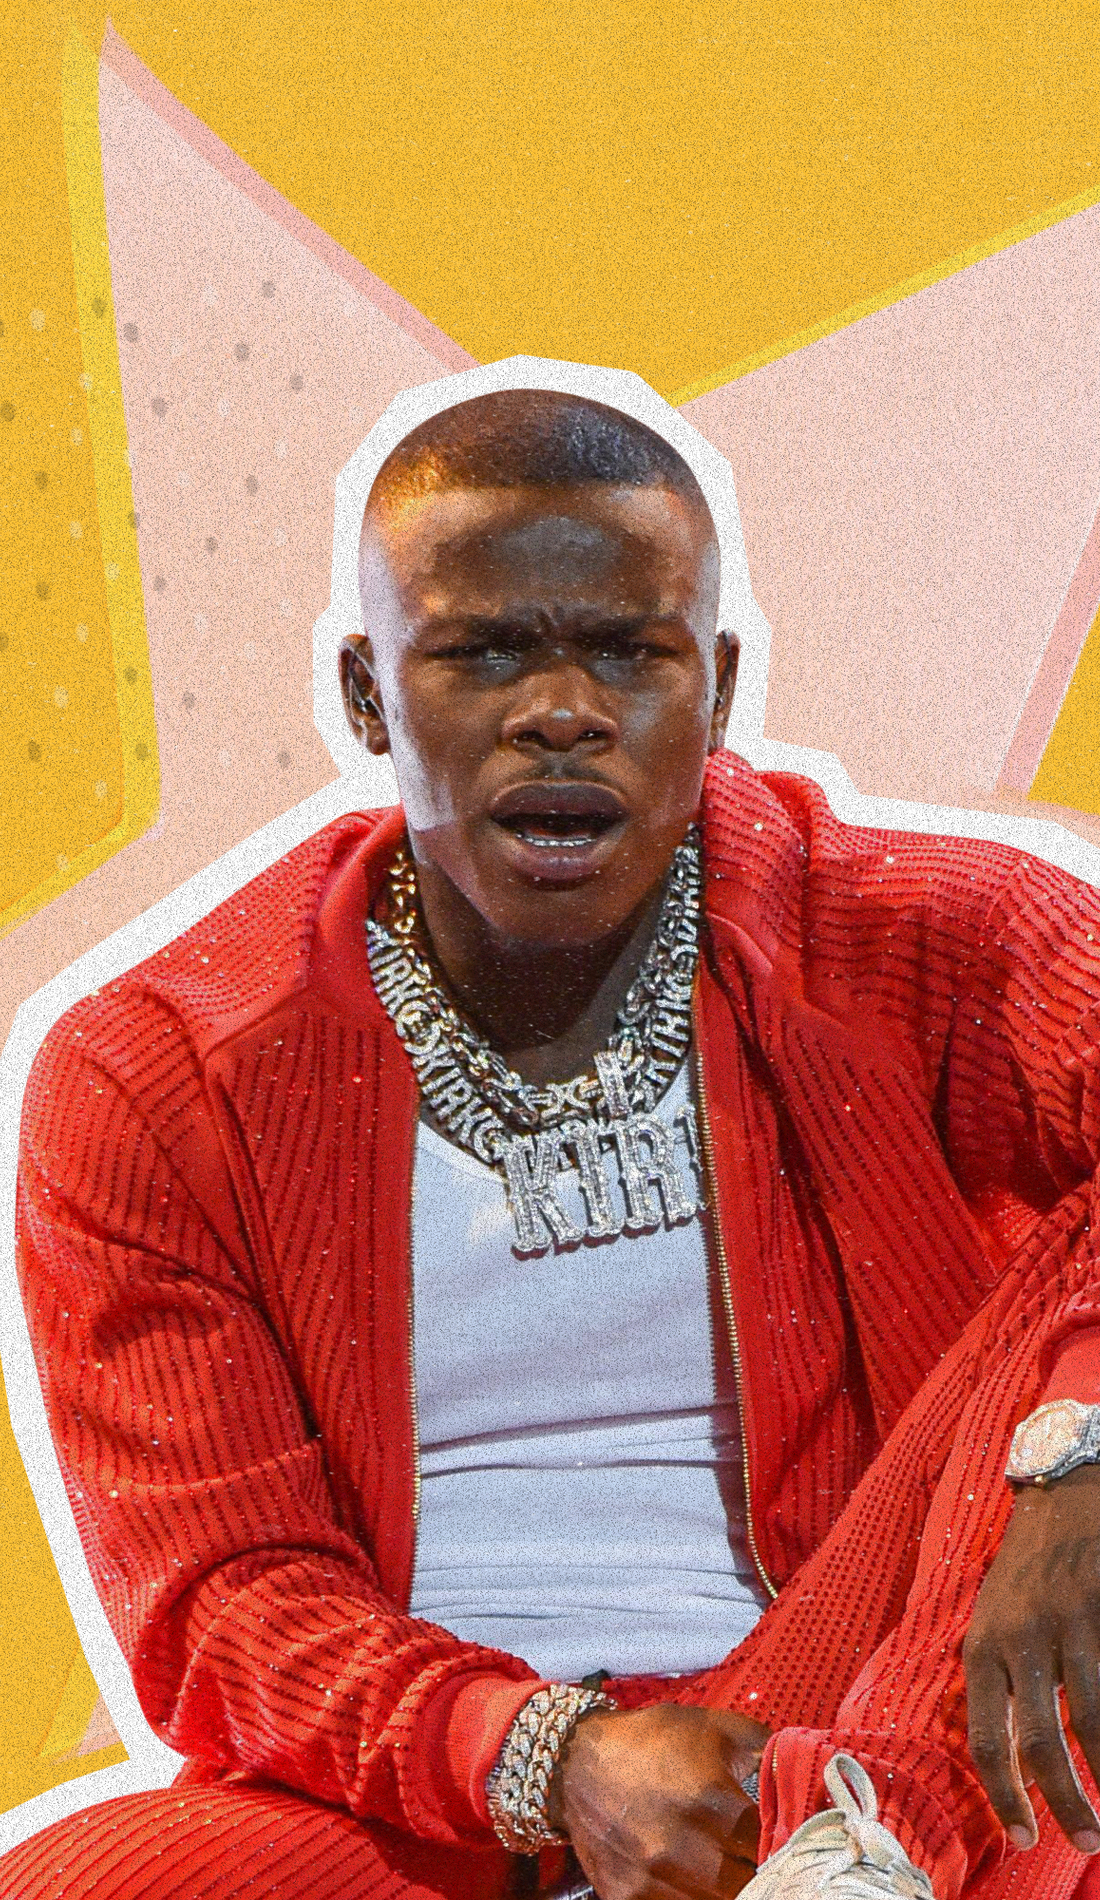 A DaBaby live event